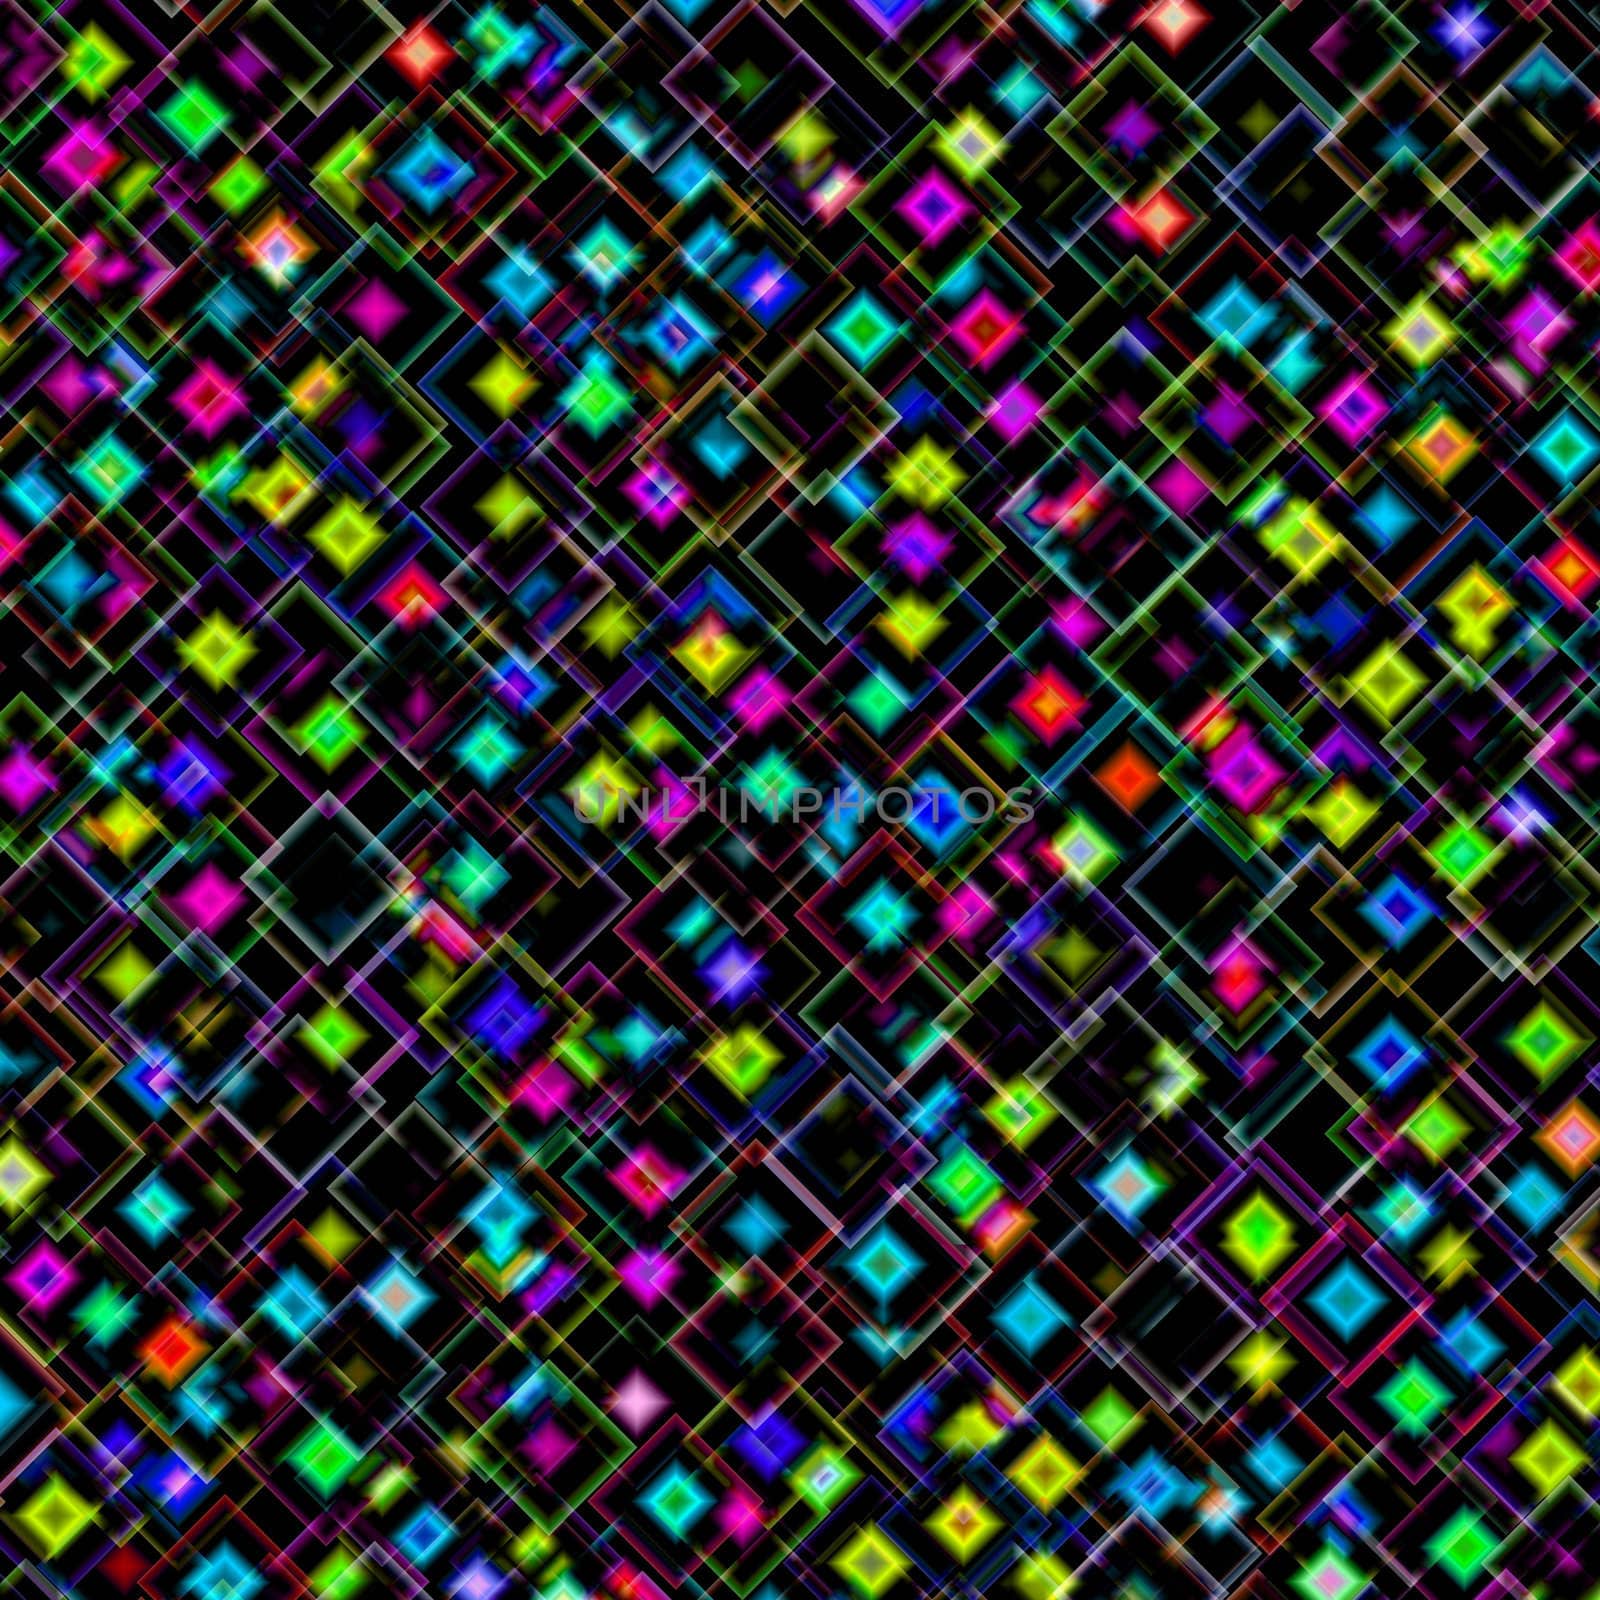 An abstract image of a very colorful image with squares, on black or white.